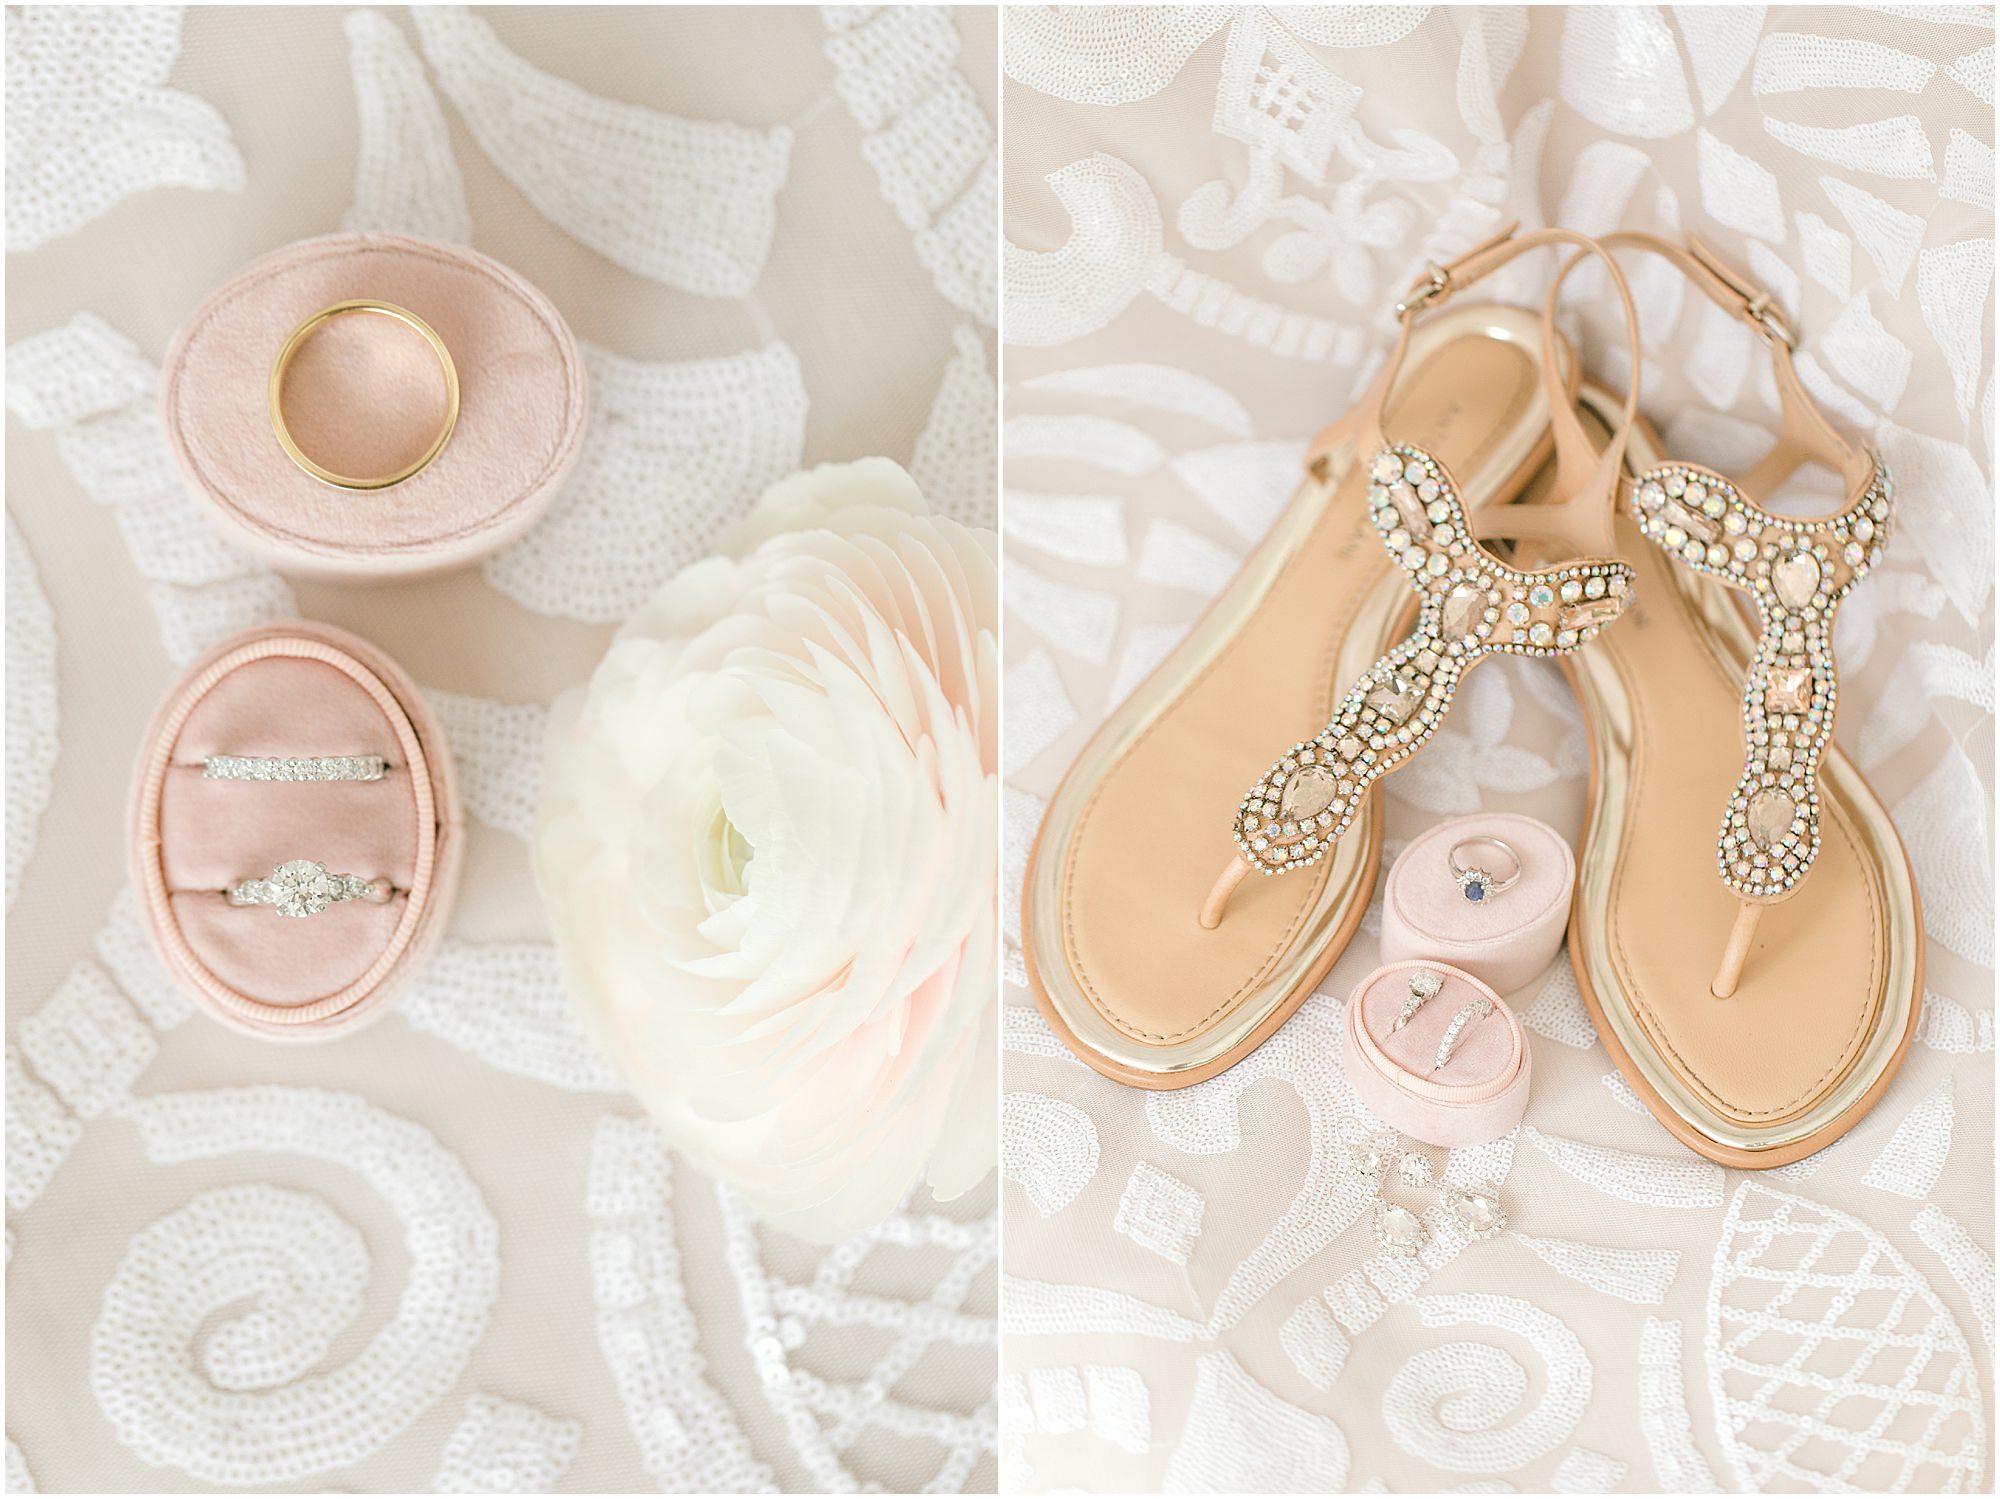 Wedding shoes, wedding rings, and earrings sitting on top of the brides Hayley Paige Dusty Rose colored wedding dress